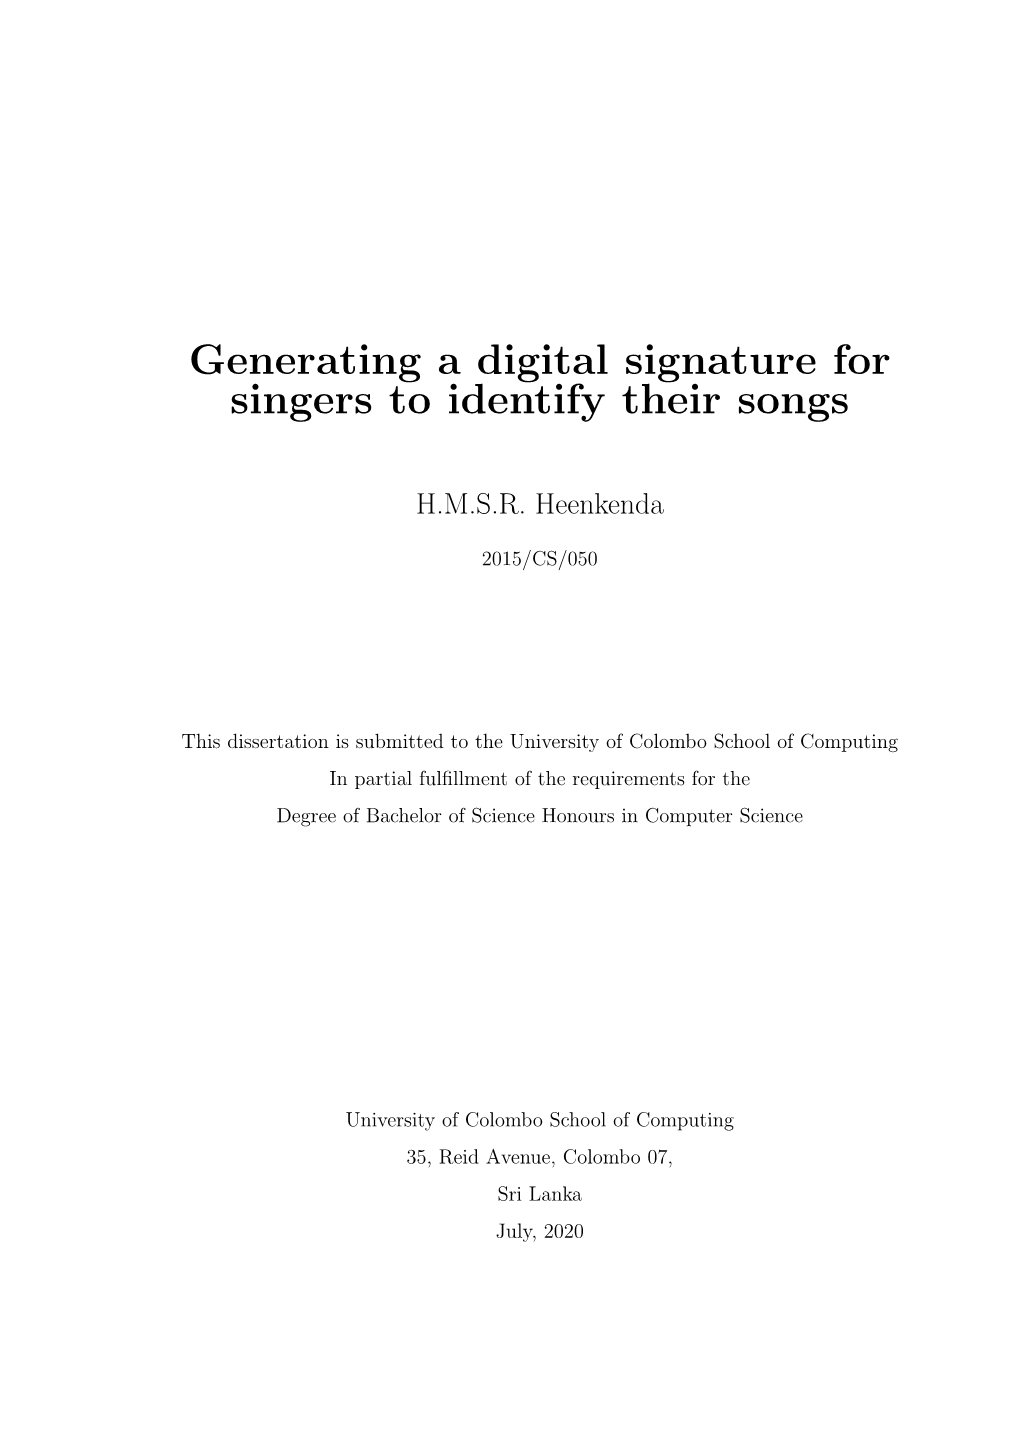 Generating a Digital Signature for Singers to Identify Their Songs